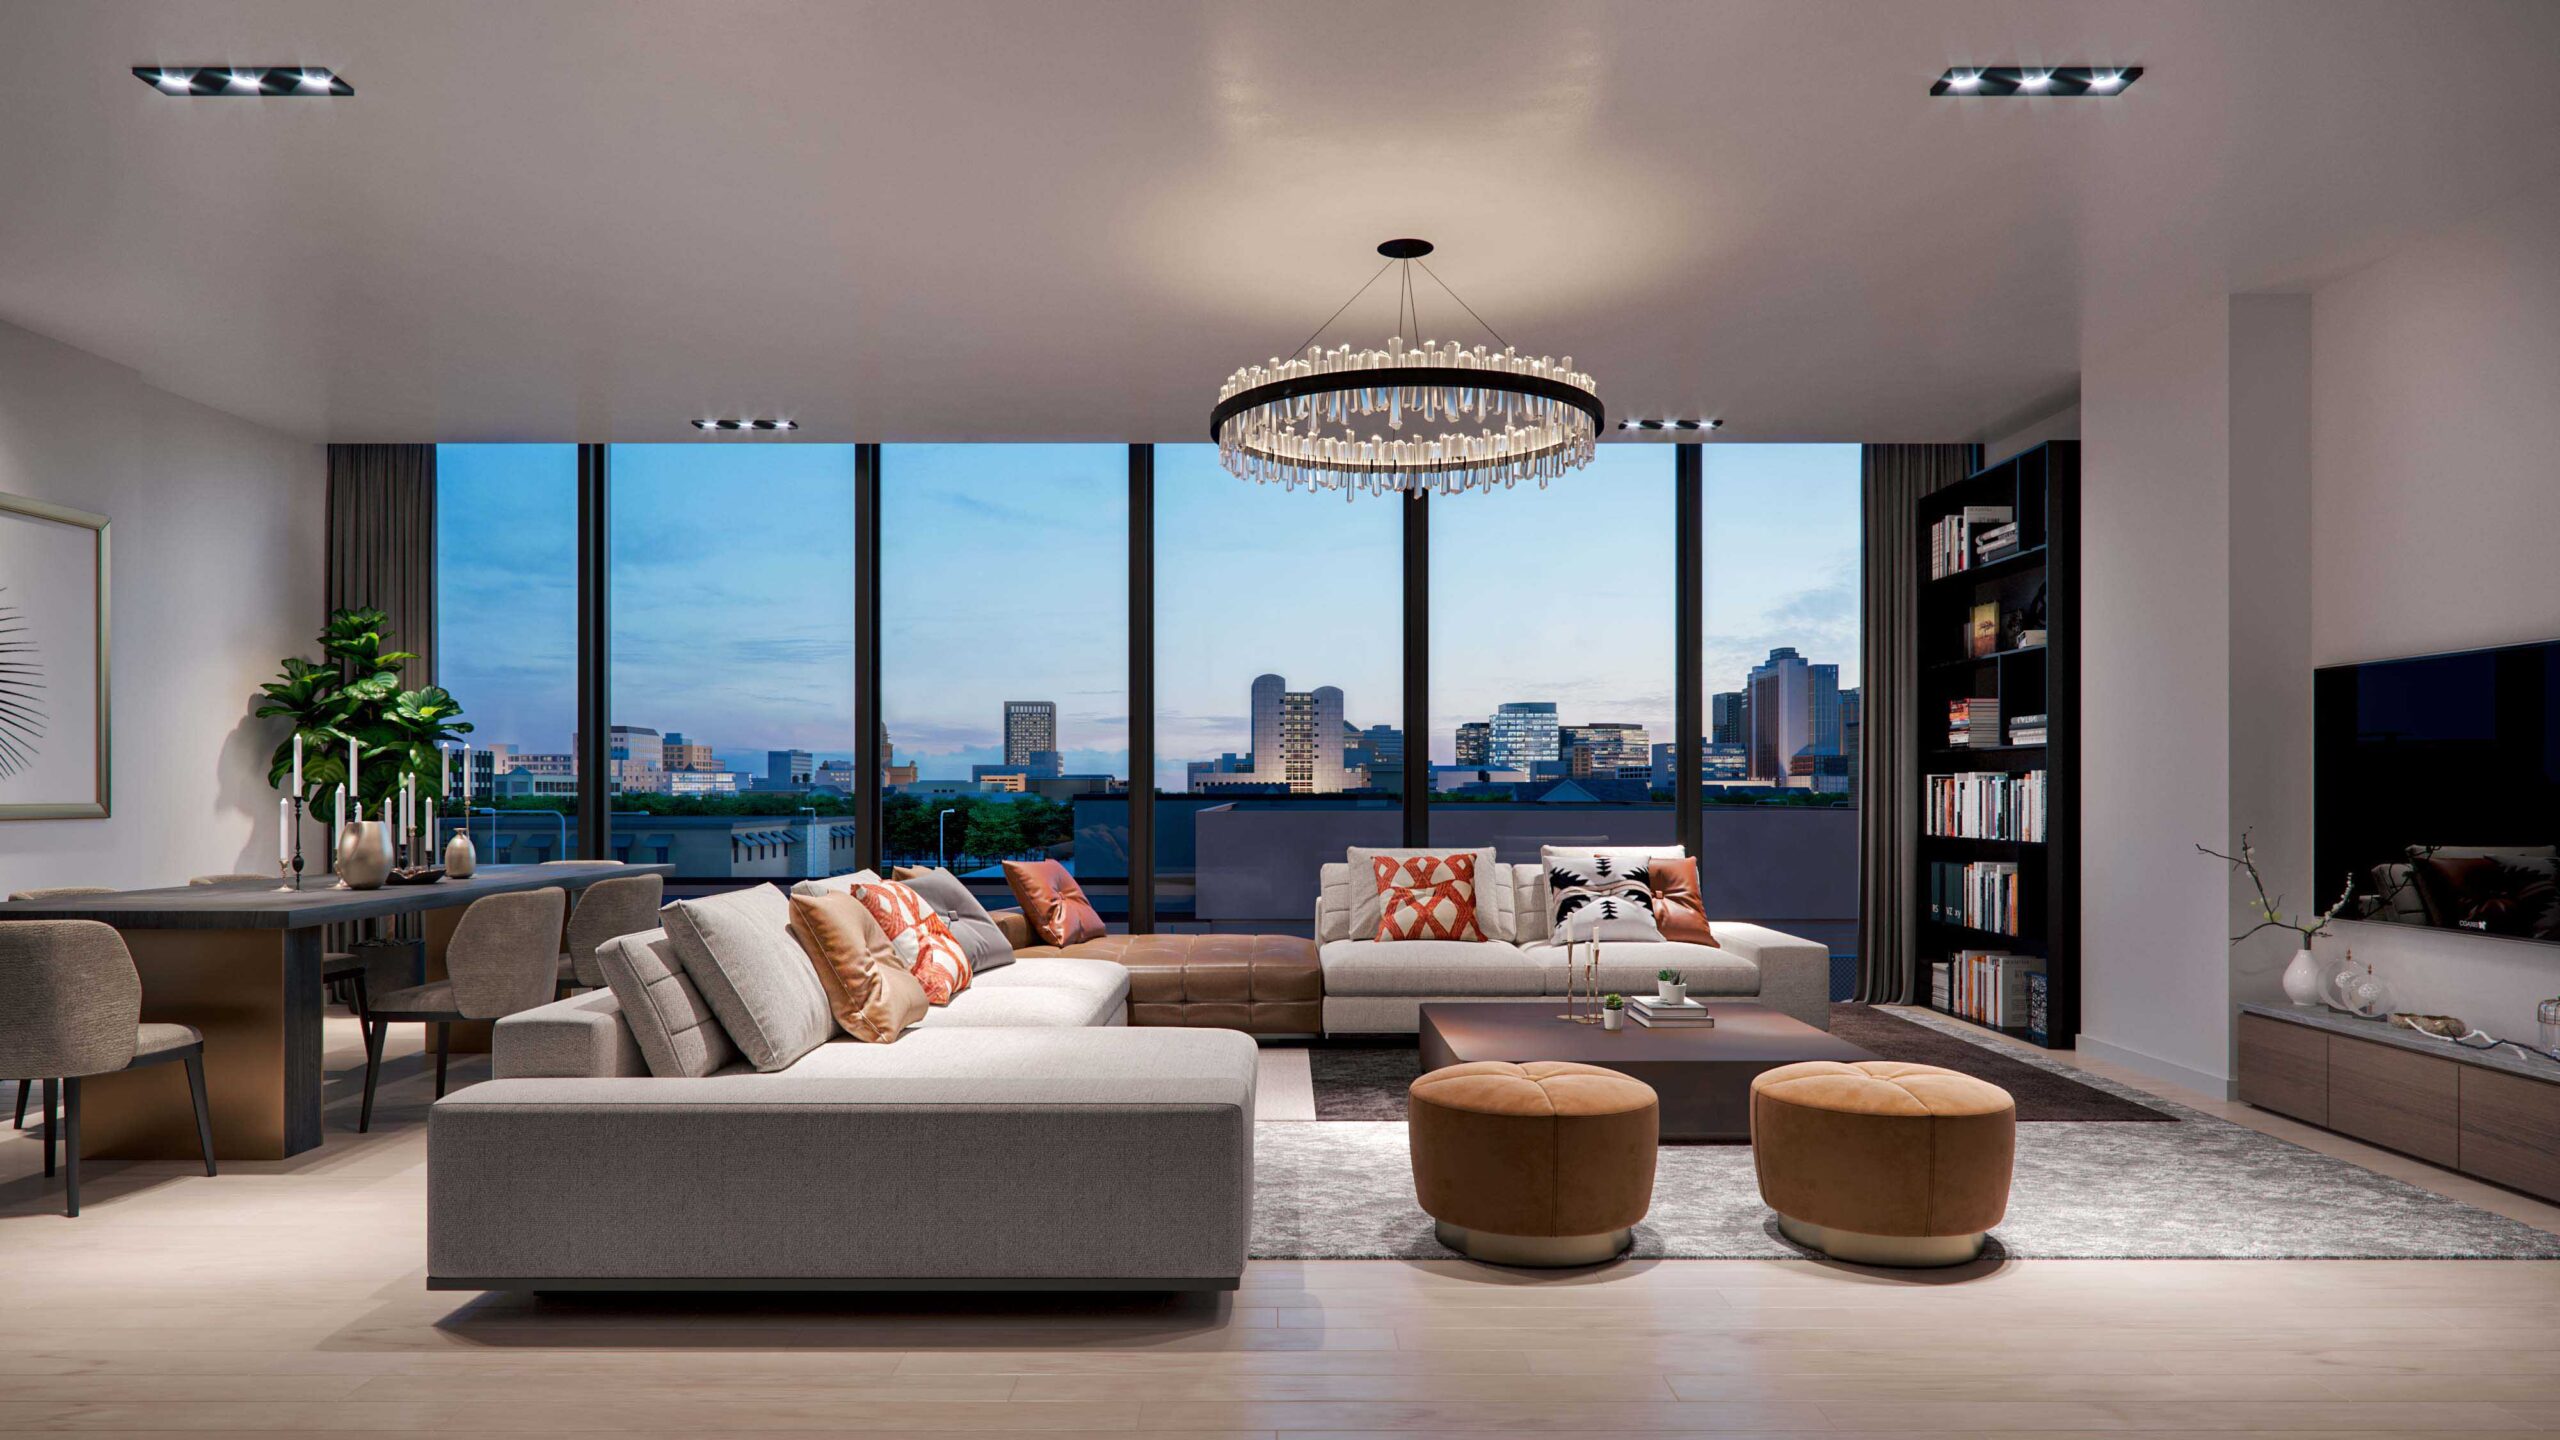 Living room rendering of a new development condo building in Austin by radical galaxy studio